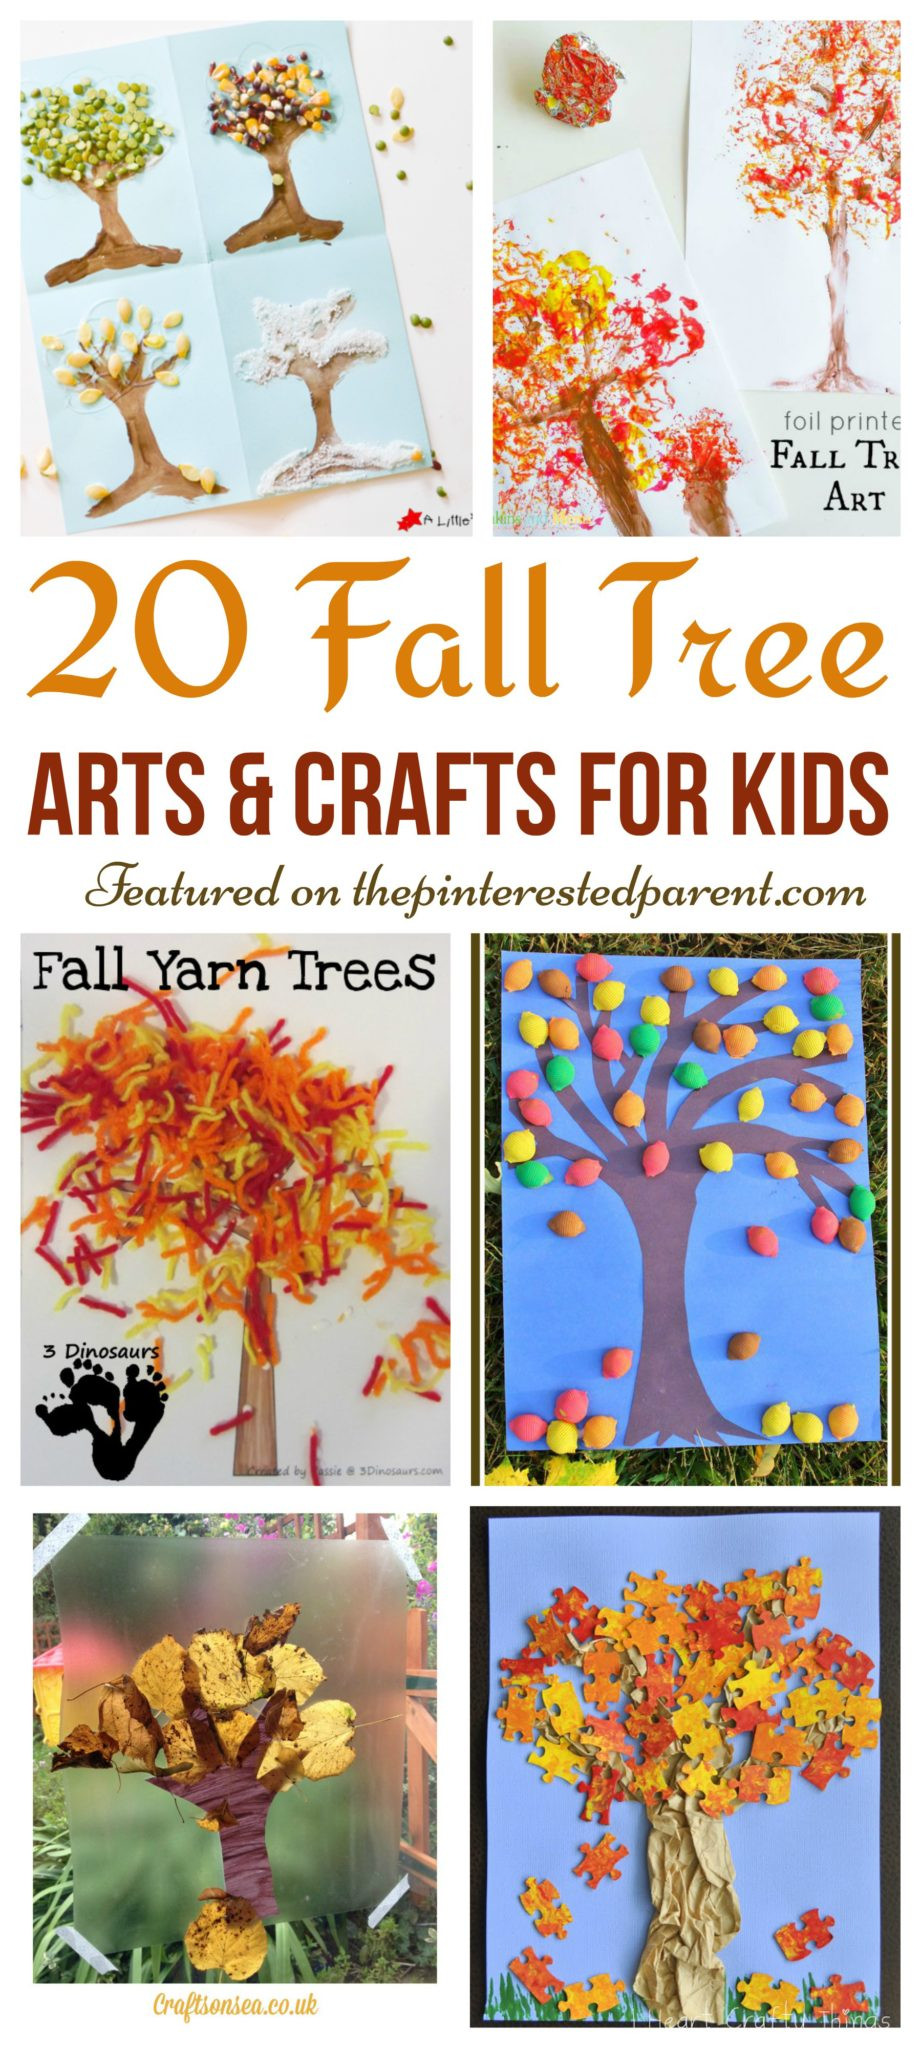 Craft Ideas For Preschool
 20 Fall Tree Arts & Crafts Ideas For Kids – The